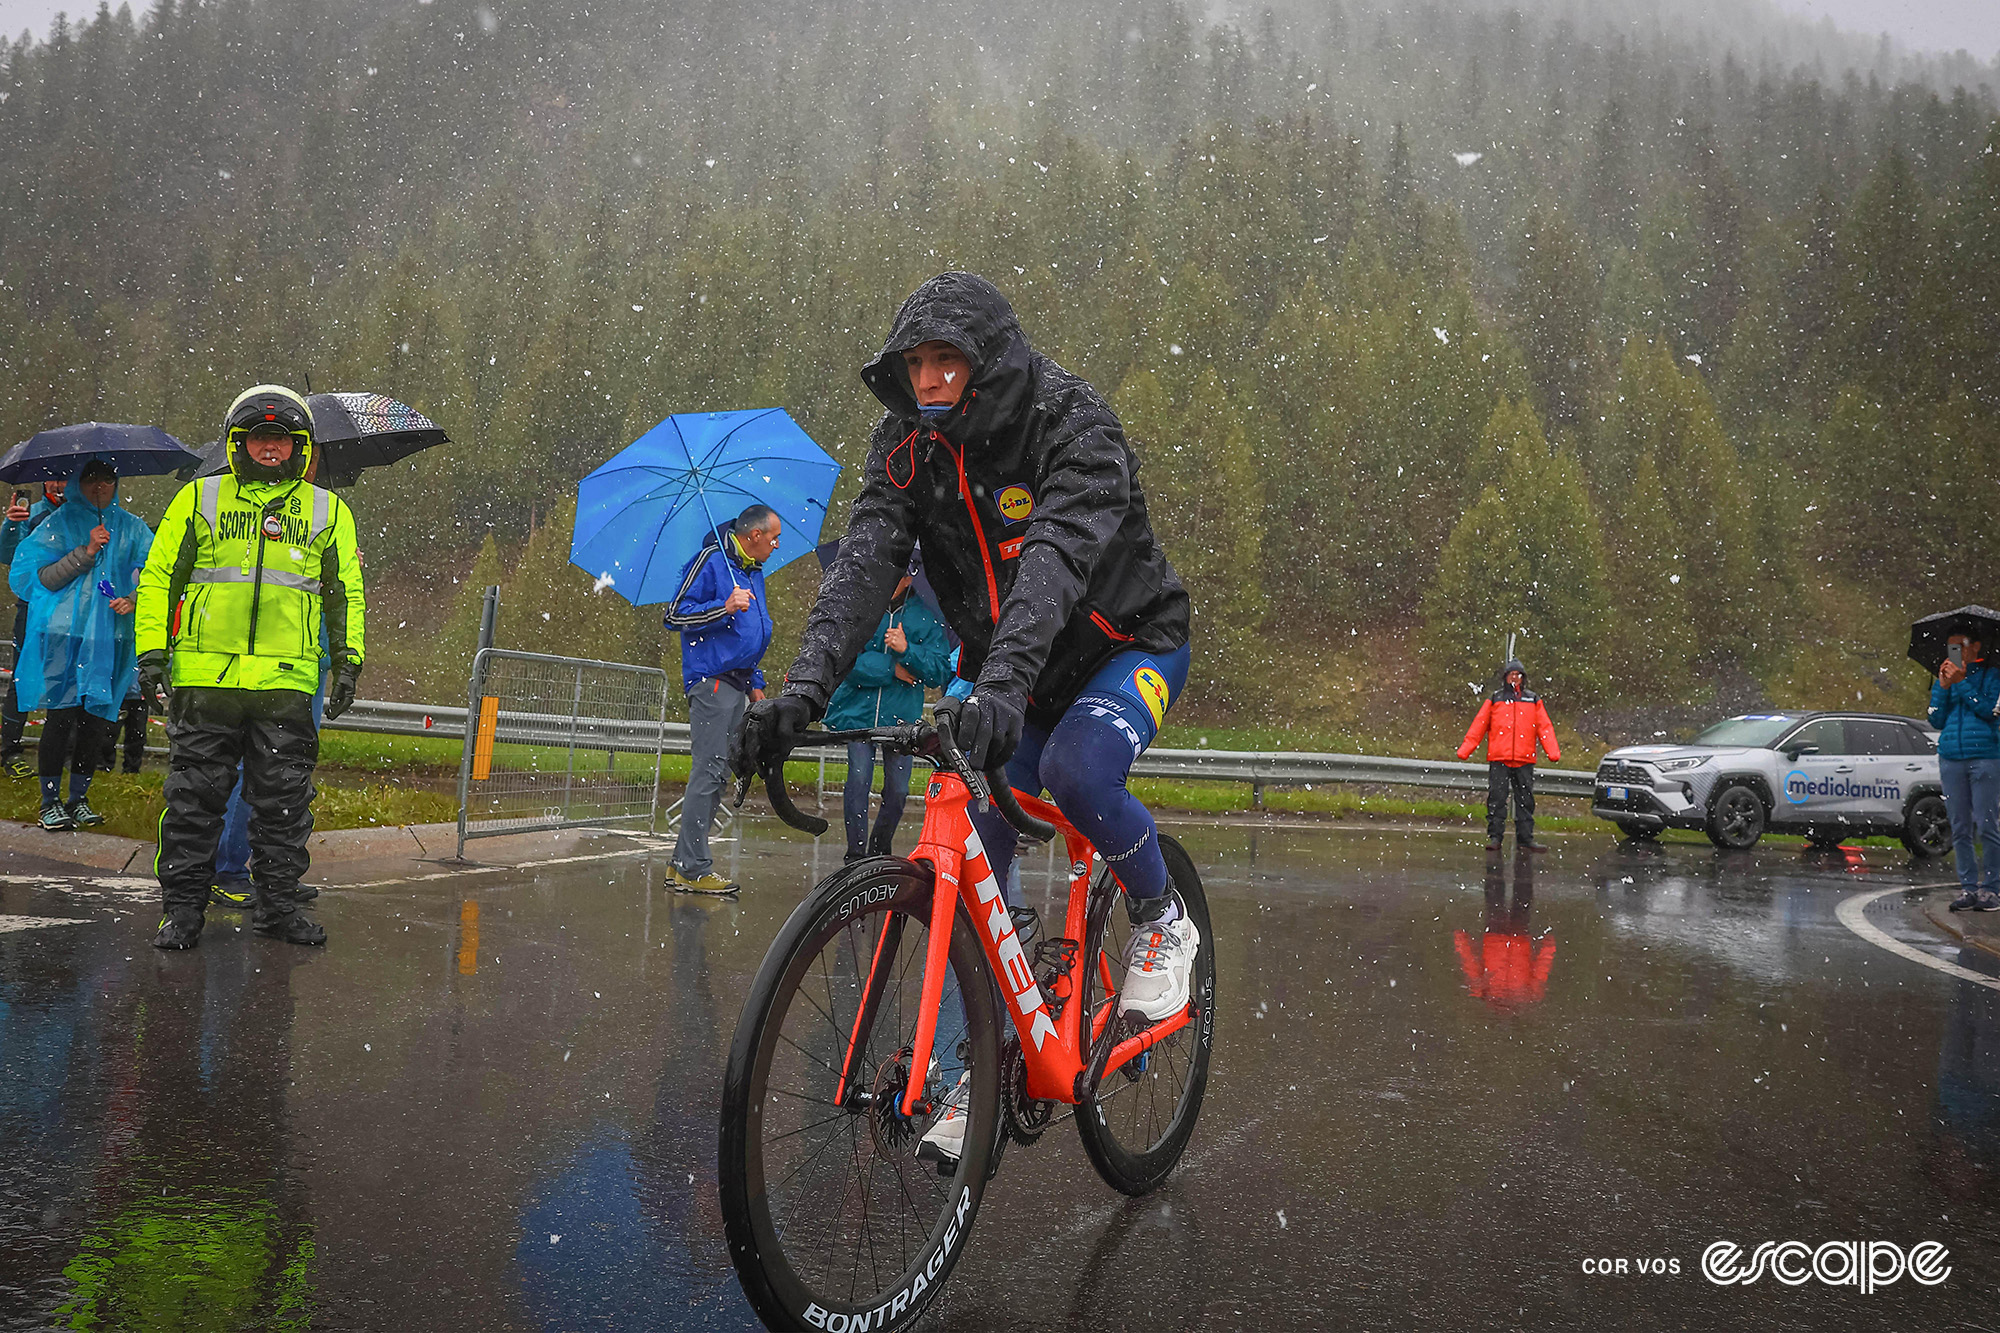 A Lidl-Trek rider at the start of the Giro d'Italia's stage 16.